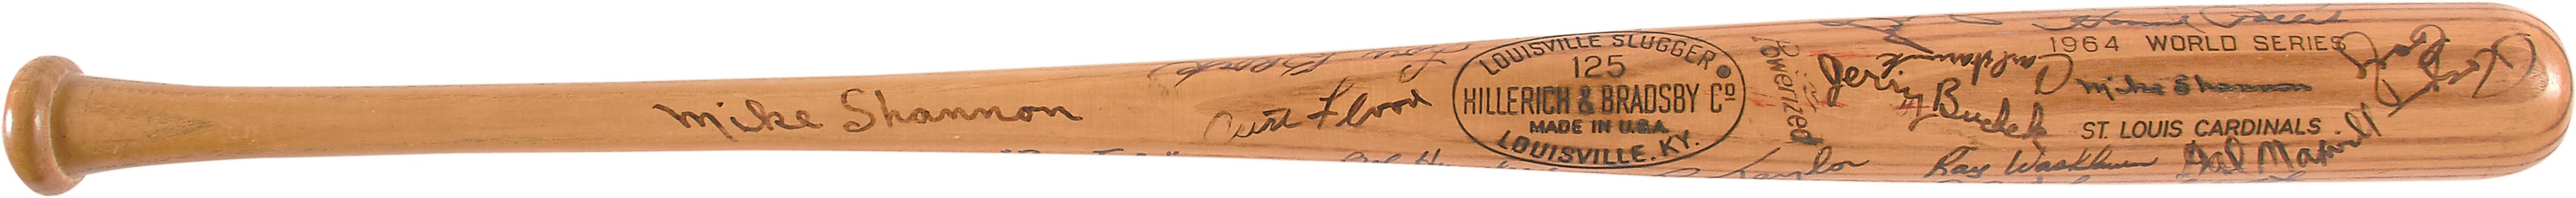 The Mike Shannon St. Louis Cardinals Collection - 1964 Mike Shannon World Series Bat Signed by Cardinals Team